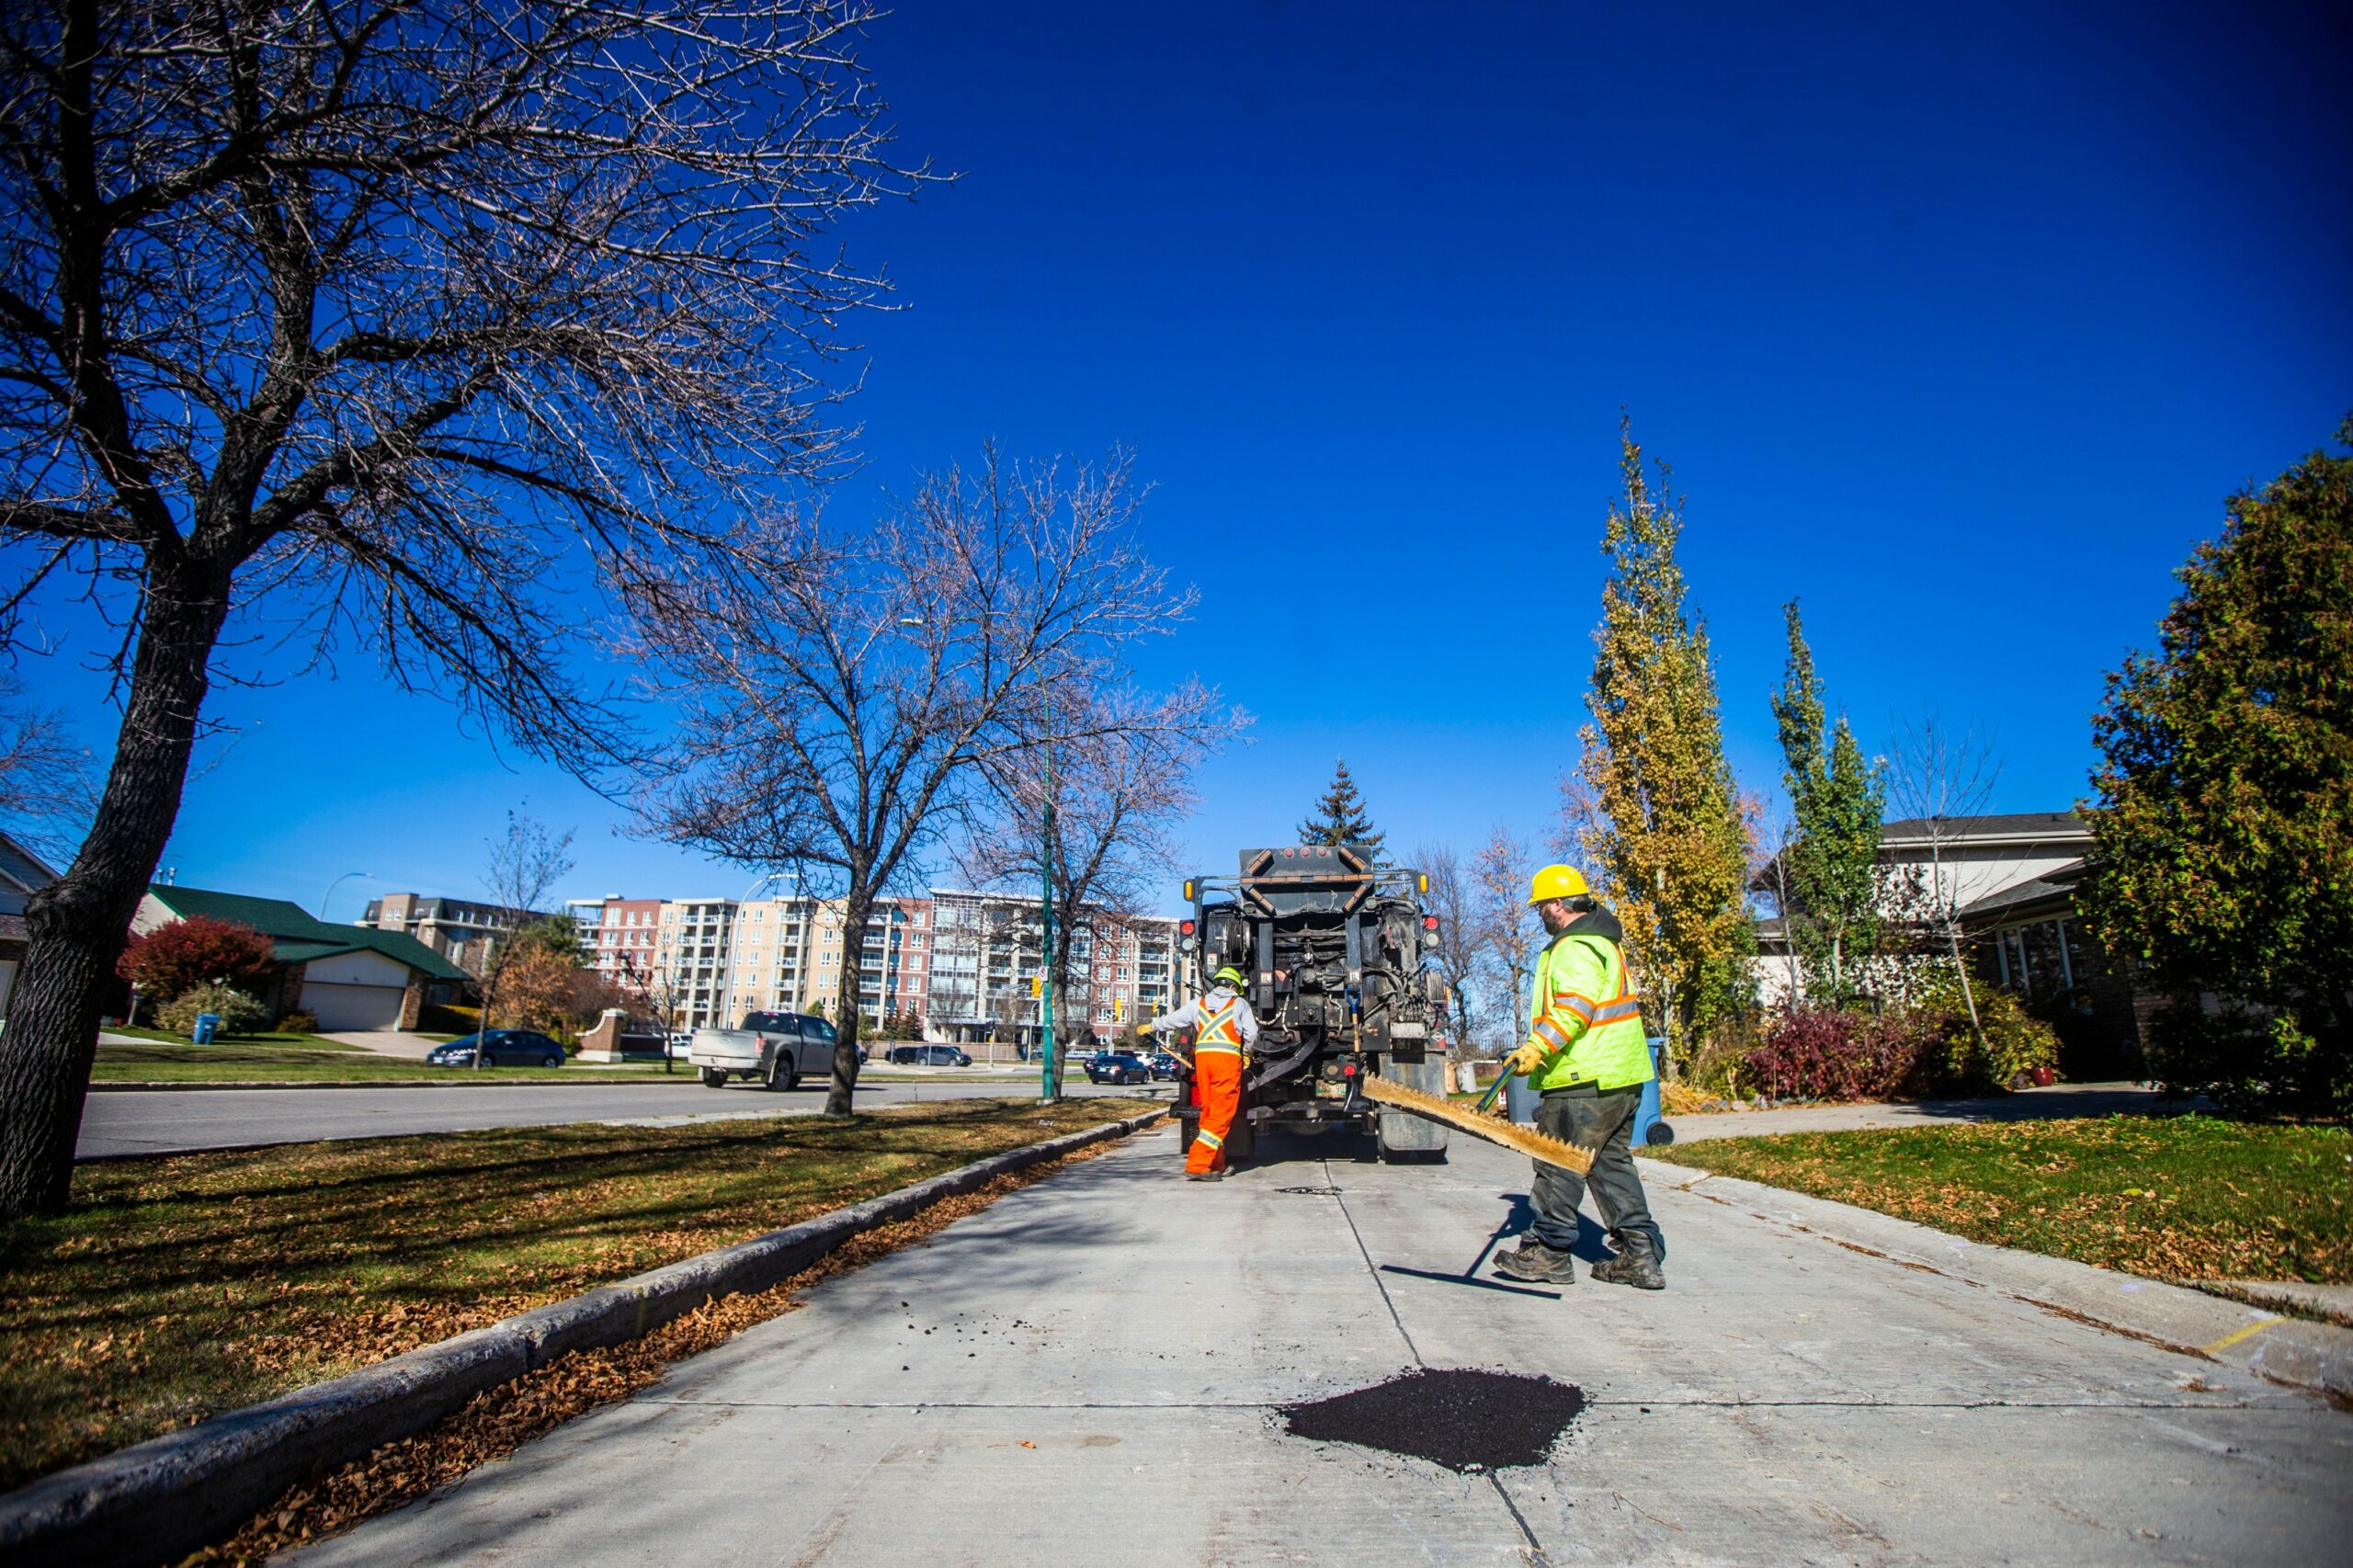 A group of city crew staff in reflective work gear move down the street after filling a pothole in the foreground